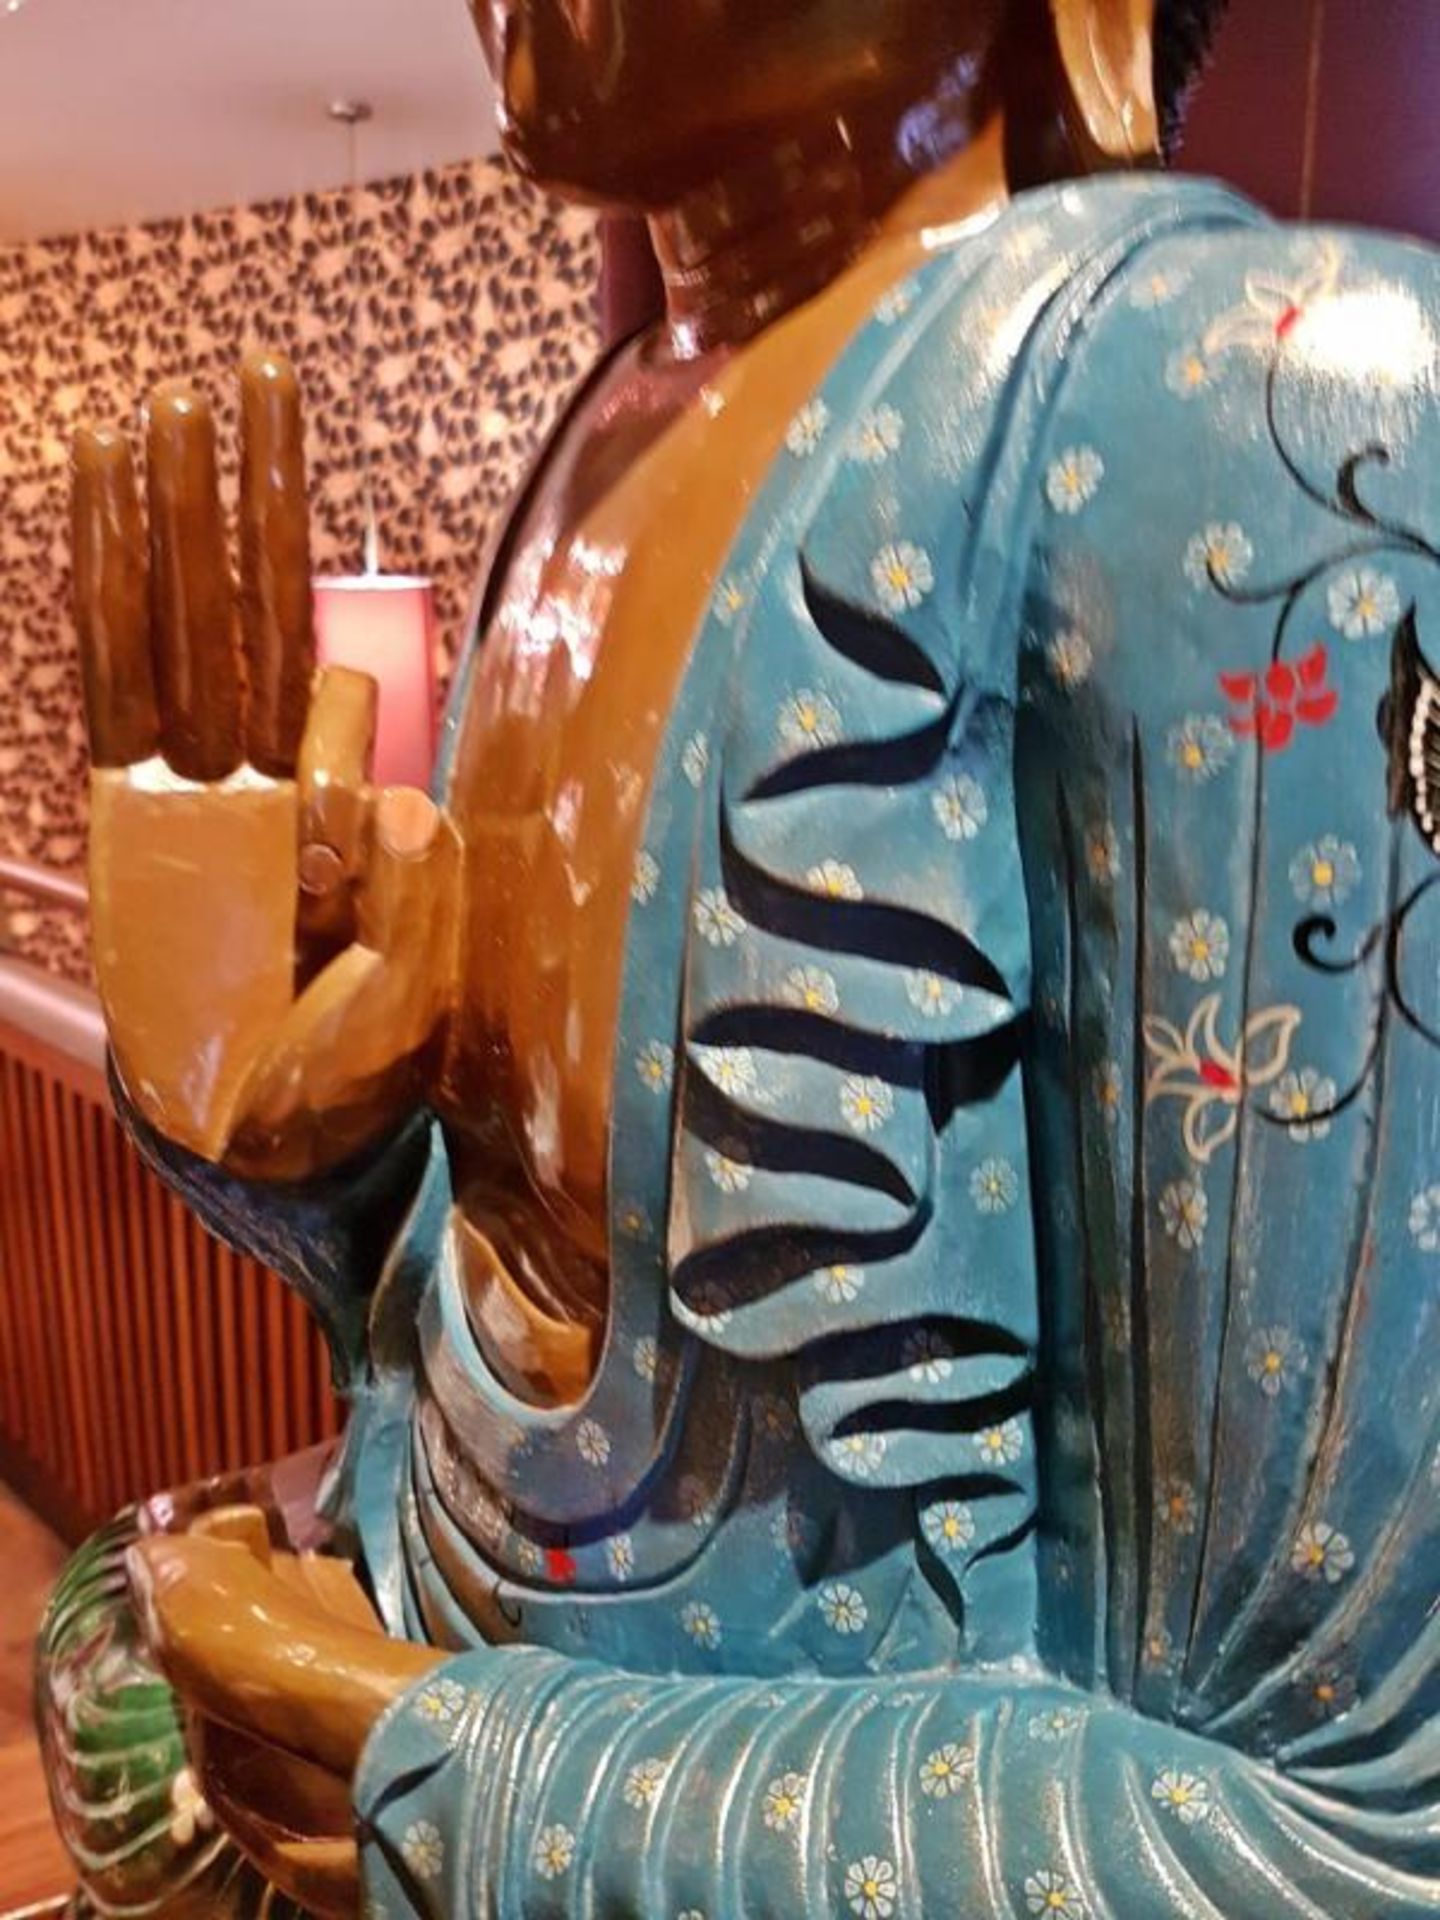 1 x Large Hand Painted Carved Wooden Sitting Buddha Statuette - H100 x W60 x D30 cms - CL297 - Ref - Image 7 of 7